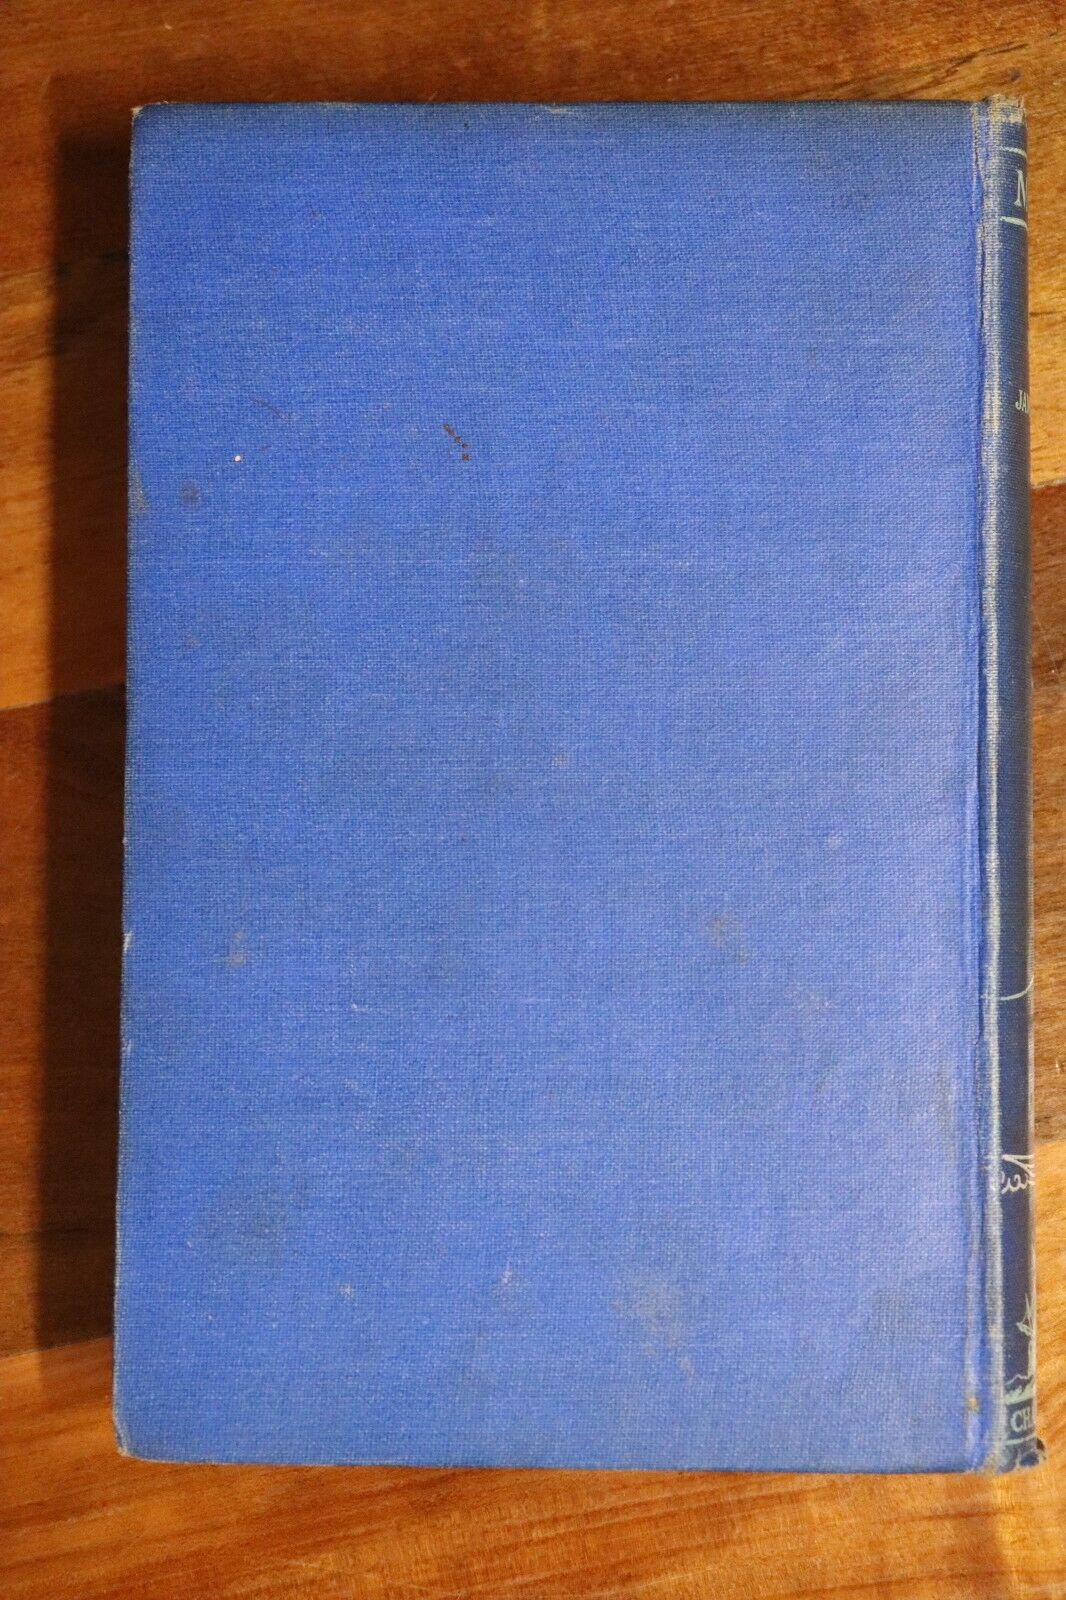 Mutiny! by Charles Nordhoff - 1933 - Antique Travel & Exploration Book